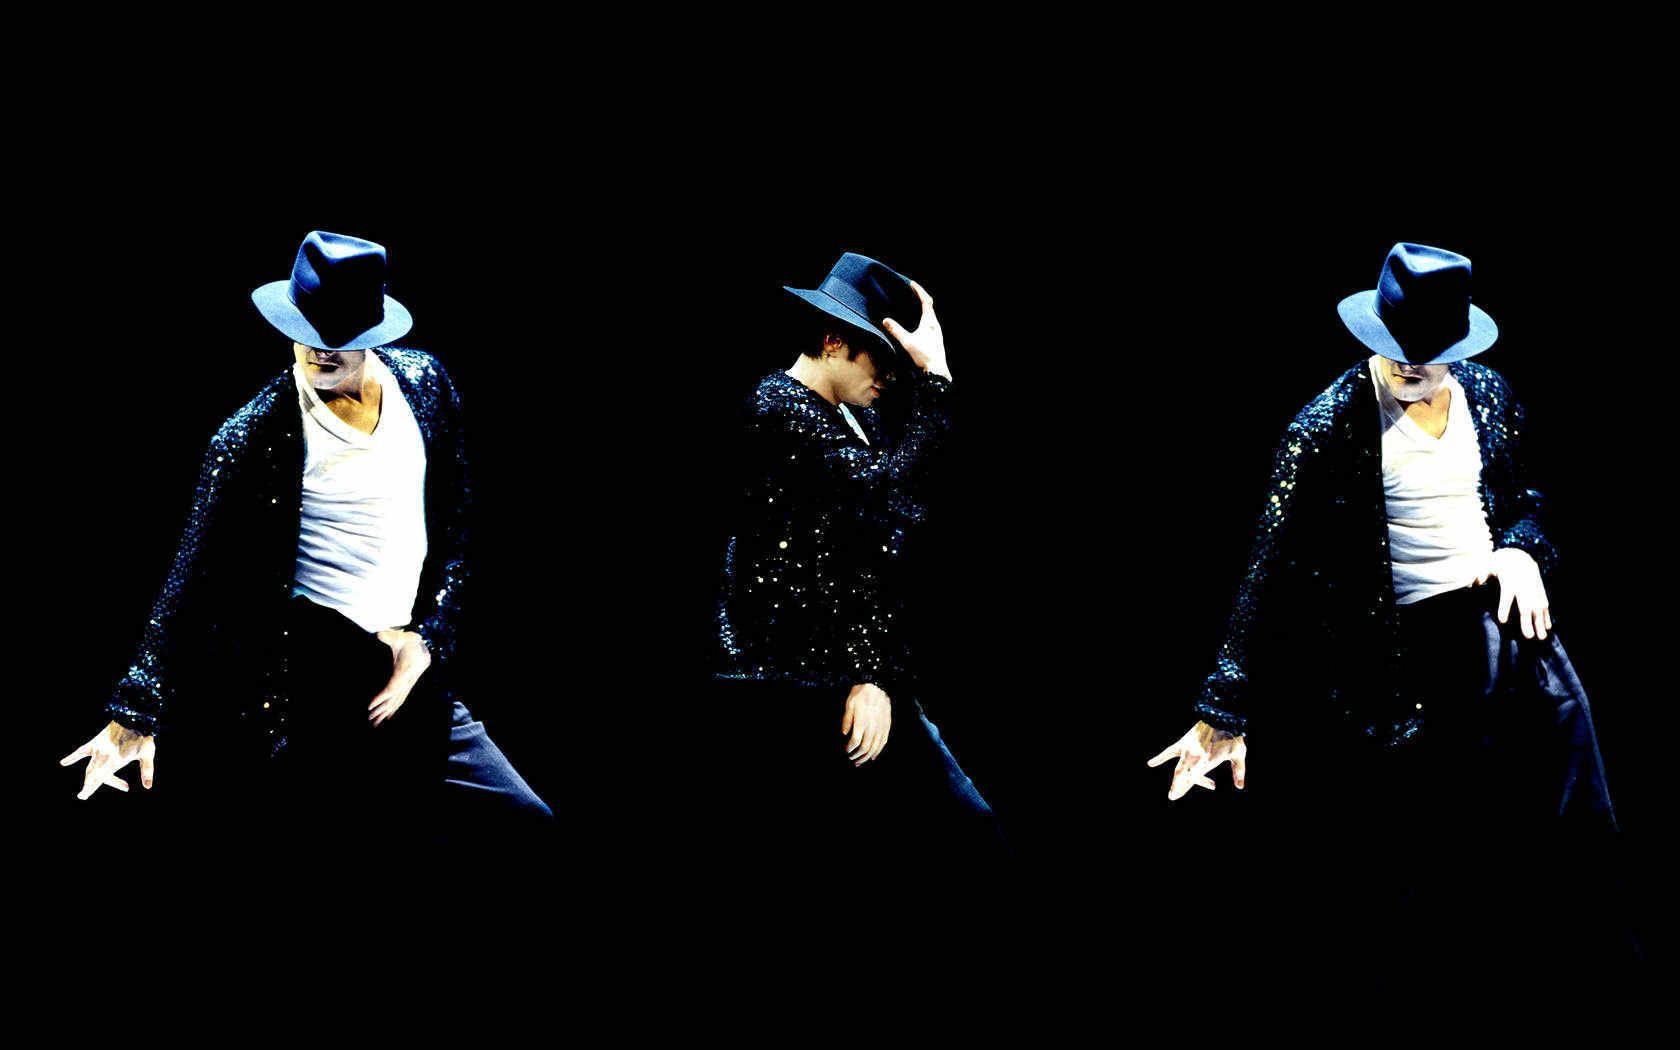 Michael Jackson HD Wallpaper And Picture